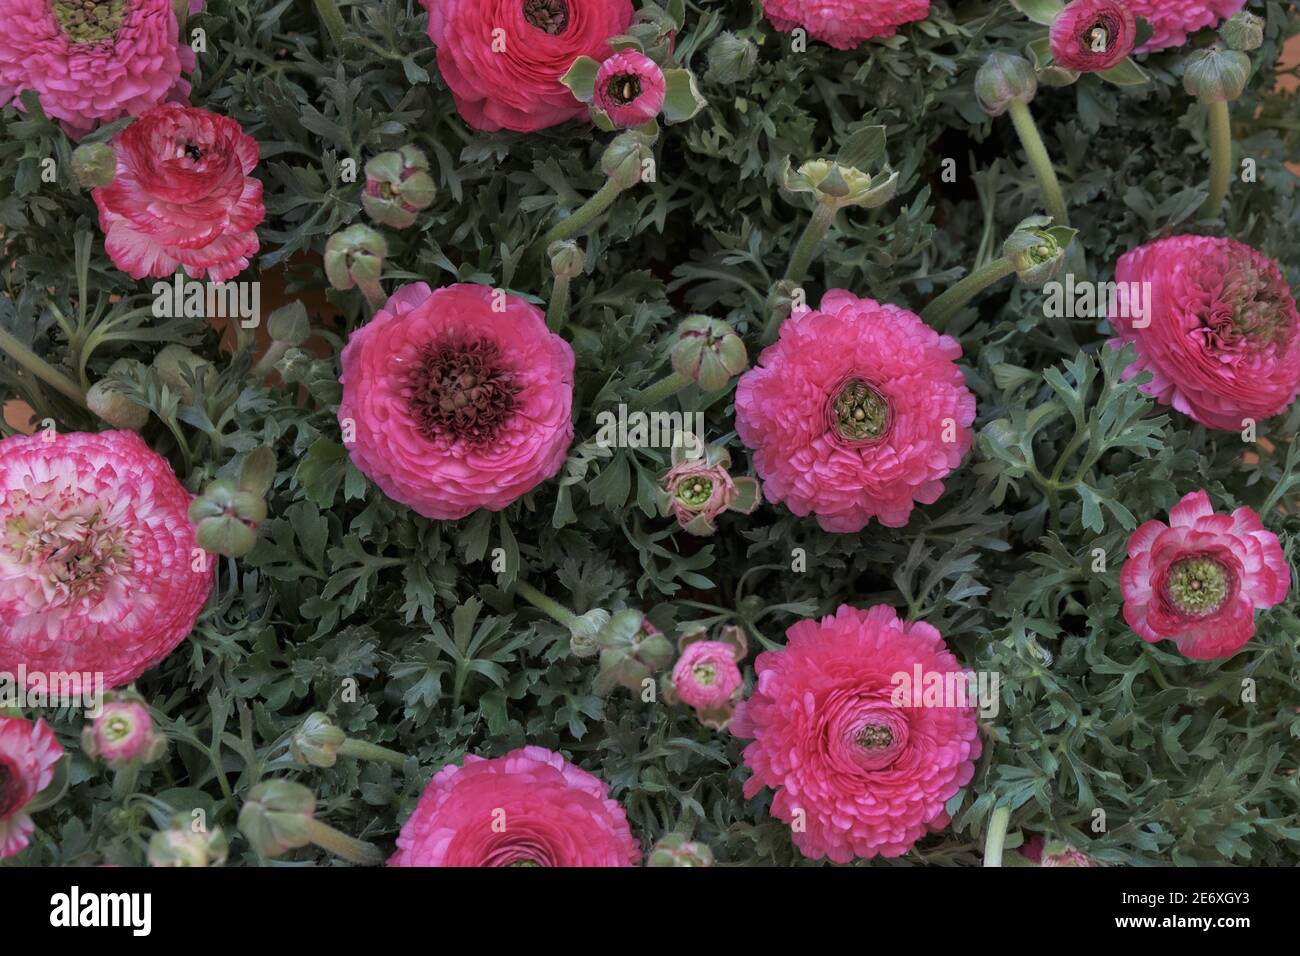 Pink ranunculus close-up background. Pink buttercups flower.Spring flowers background. Floral card in pastel colors.Beautiful delicate spring flowers. Stock Photo